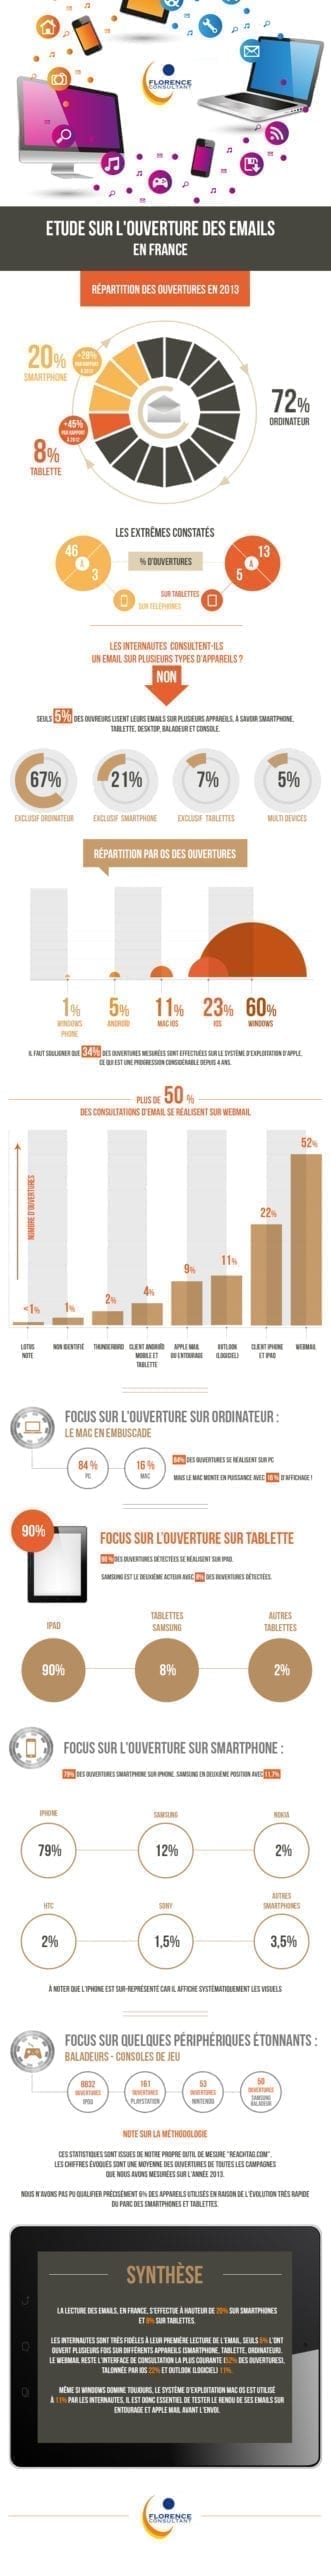 infographie-ouverture-emailing-france